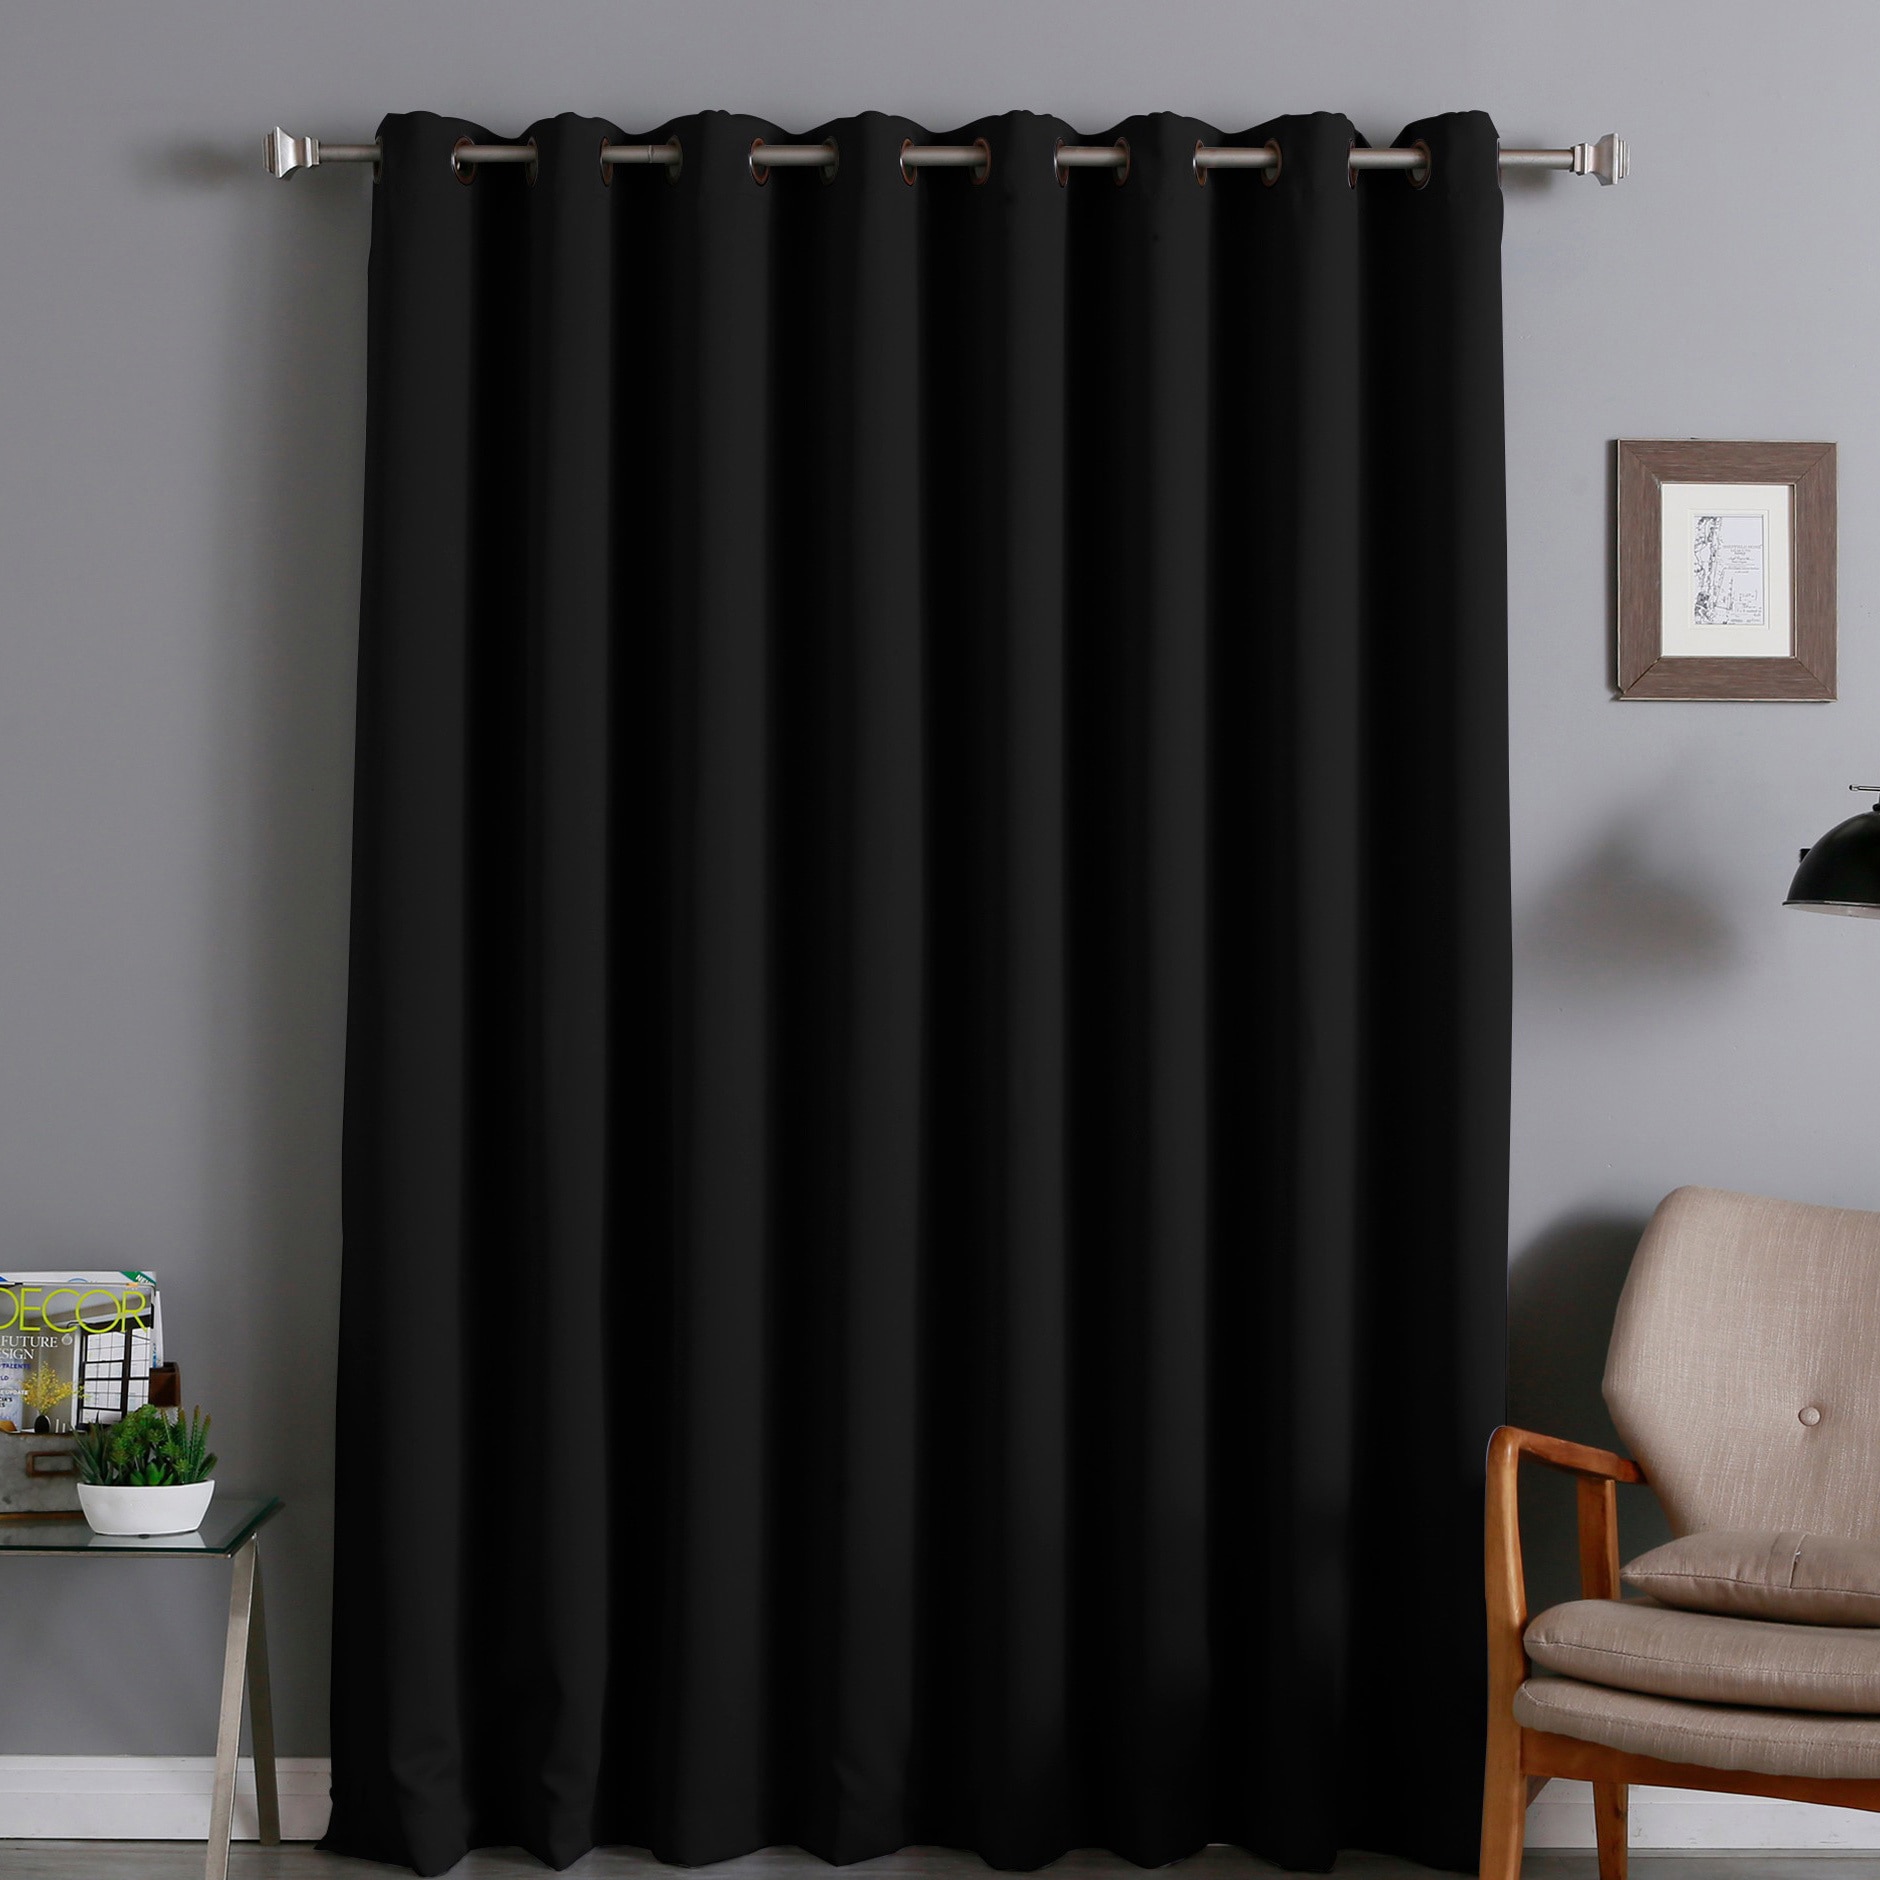 Aurora Home Extra Wide Thermal 96 Inch Blackout Curtain Panel 100 X 96 100 X 96 On Sale Overstock 5793846